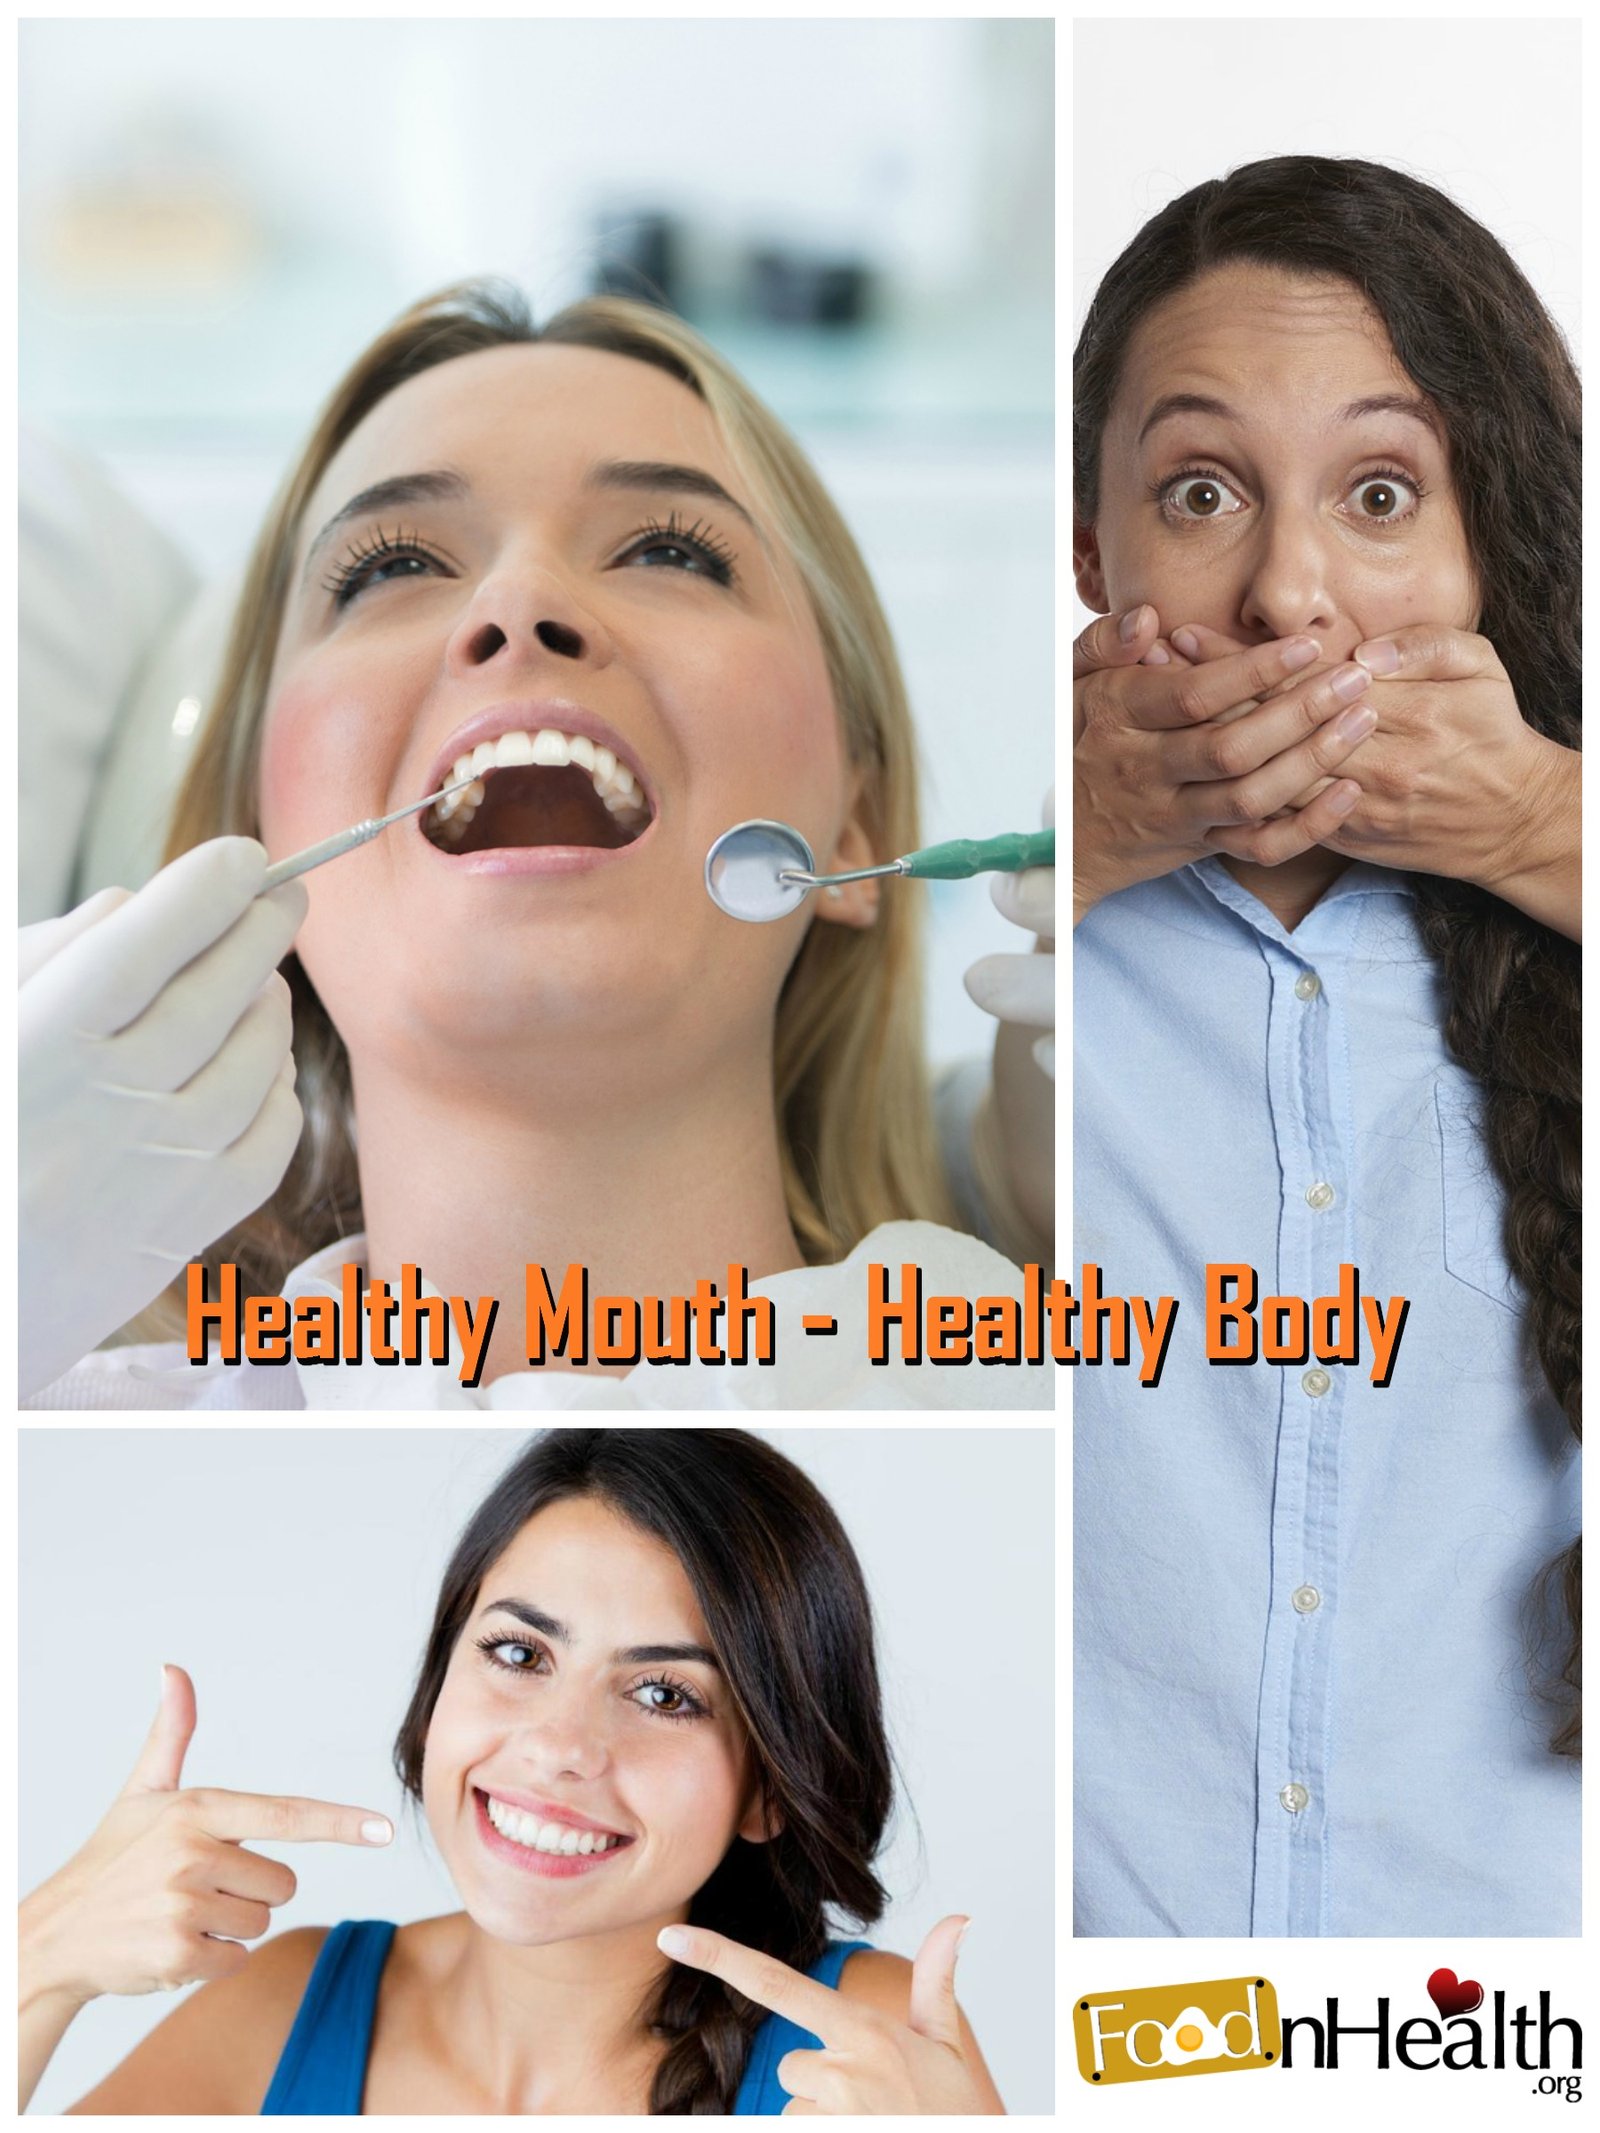 How oral health affects overall health